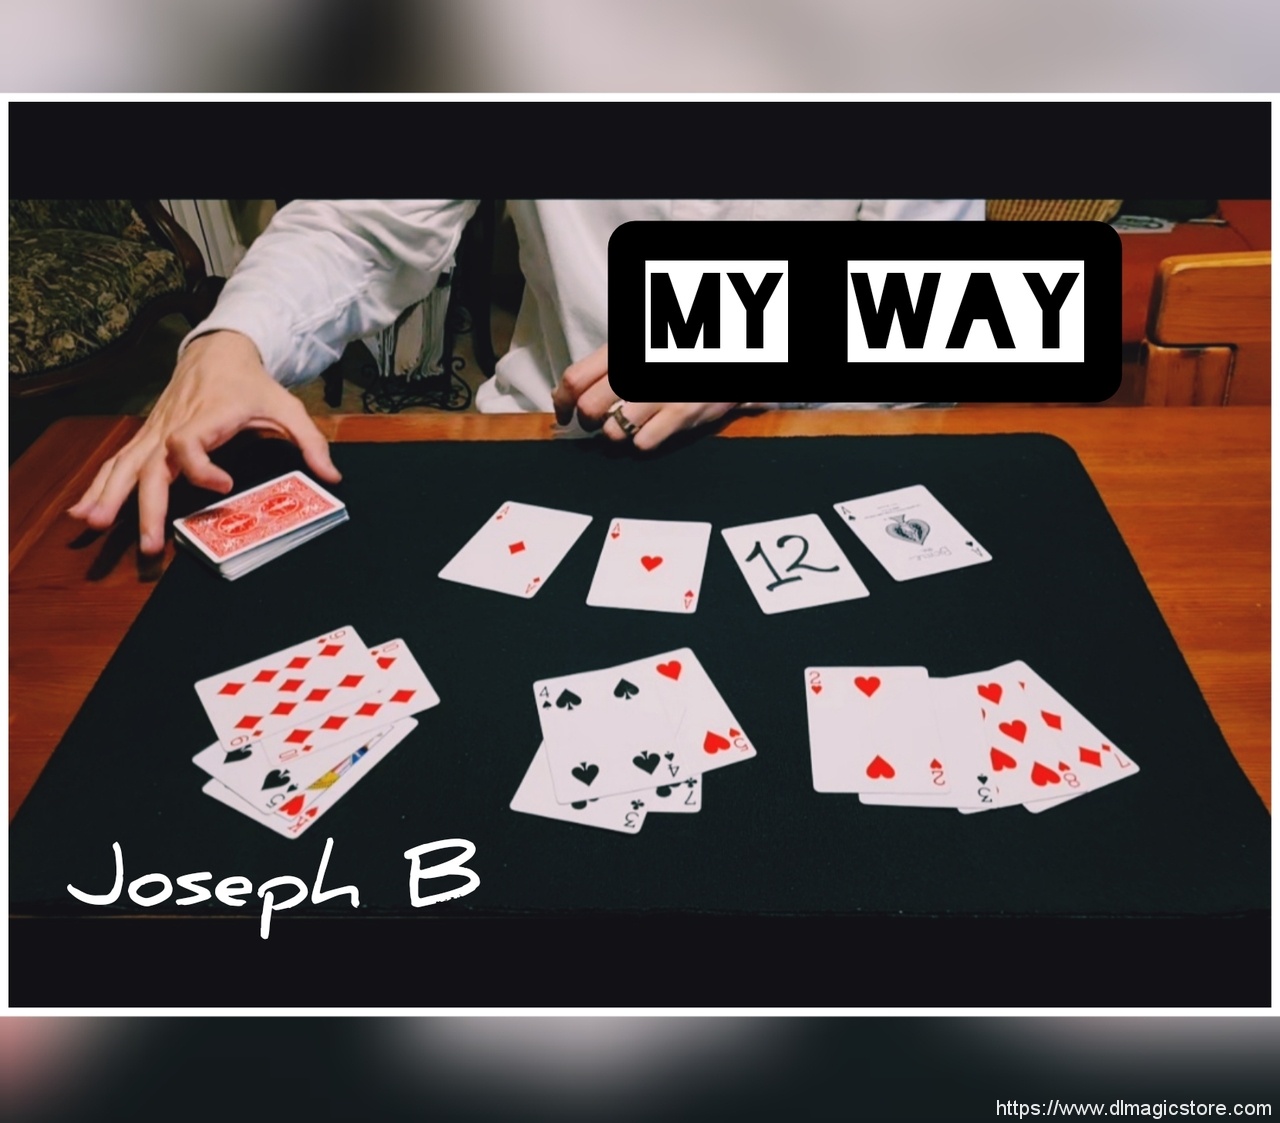 MY WAY BY JOSEPH B. (Instant Download)